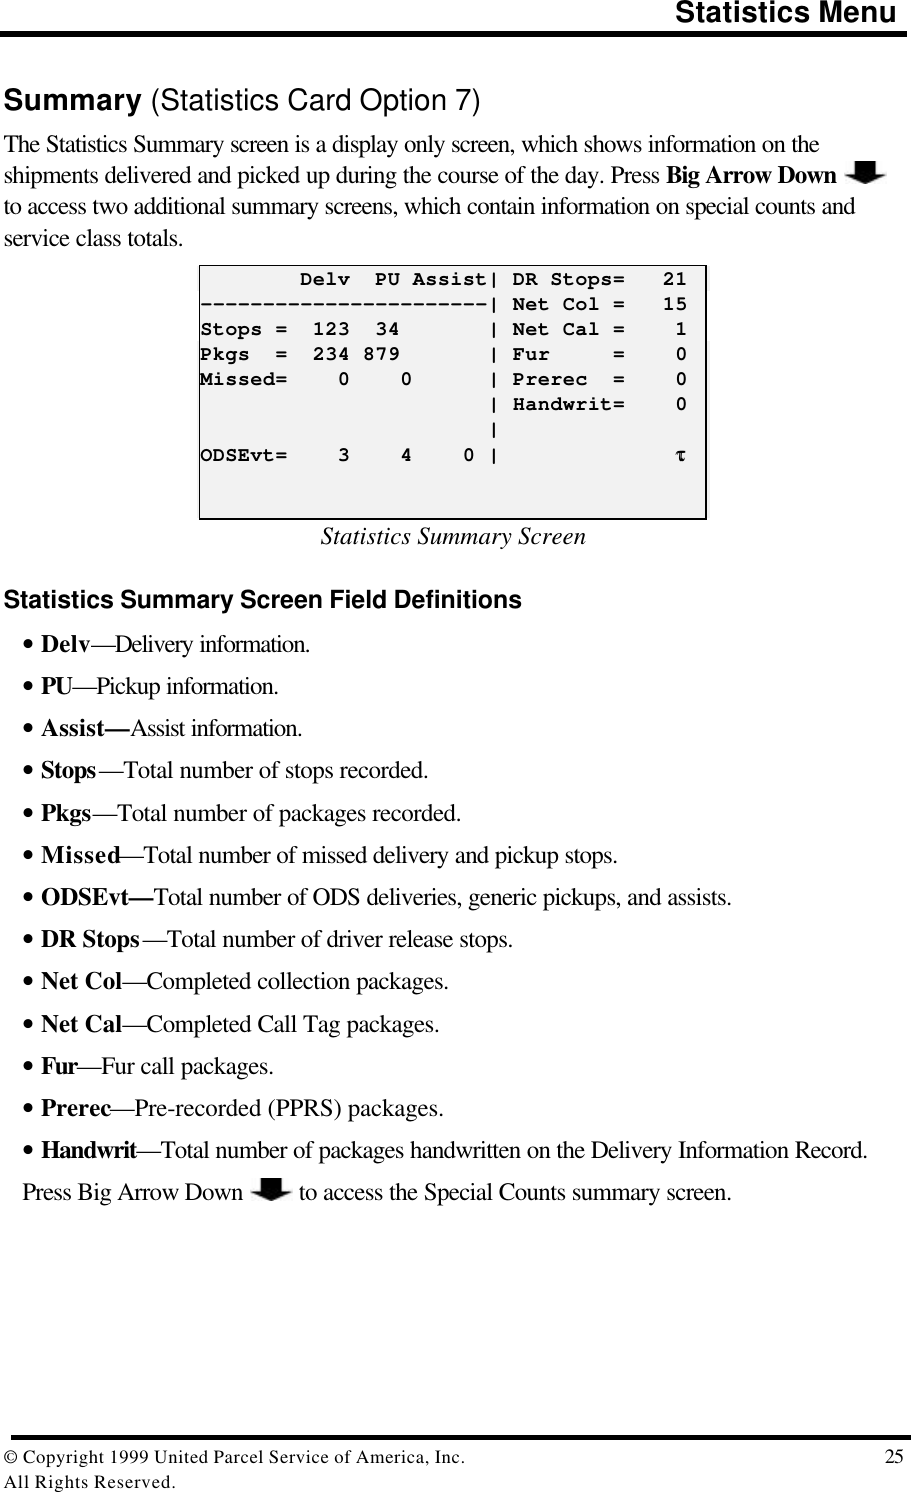                                                                                       Statistics Menu© Copyright 1999 United Parcel Service of America, Inc.  25All Rights Reserved.Summary (Statistics Card Option 7)The Statistics Summary screen is a display only screen, which shows information on theshipments delivered and picked up during the course of the day. Press Big Arrow Down to access two additional summary screens, which contain information on special counts andservice class totals.        Delv  PU Assist| DR Stops=   21-----------------------| Net Col =   15Stops =  123  34       | Net Cal =    1Pkgs  =  234 879       | Fur     =    0Missed=    0    0      | Prerec  =    0                       | Handwrit=    0                       |ODSEvt=    3    4    0 |              ττStatistics Summary ScreenStatistics Summary Screen Field Definitions• Delv—Delivery information.• PU—Pickup information.• Assist—Assist information.• Stops—Total number of stops recorded.• Pkgs—Total number of packages recorded.• Missed—Total number of missed delivery and pickup stops.• ODSEvt—Total number of ODS deliveries, generic pickups, and assists.• DR Stops—Total number of driver release stops.• Net Col—Completed collection packages.• Net Cal—Completed Call Tag packages.• Fur—Fur call packages.• Prerec—Pre-recorded (PPRS) packages.• Handwrit—Total number of packages handwritten on the Delivery Information Record.Press Big Arrow Down   to access the Special Counts summary screen.